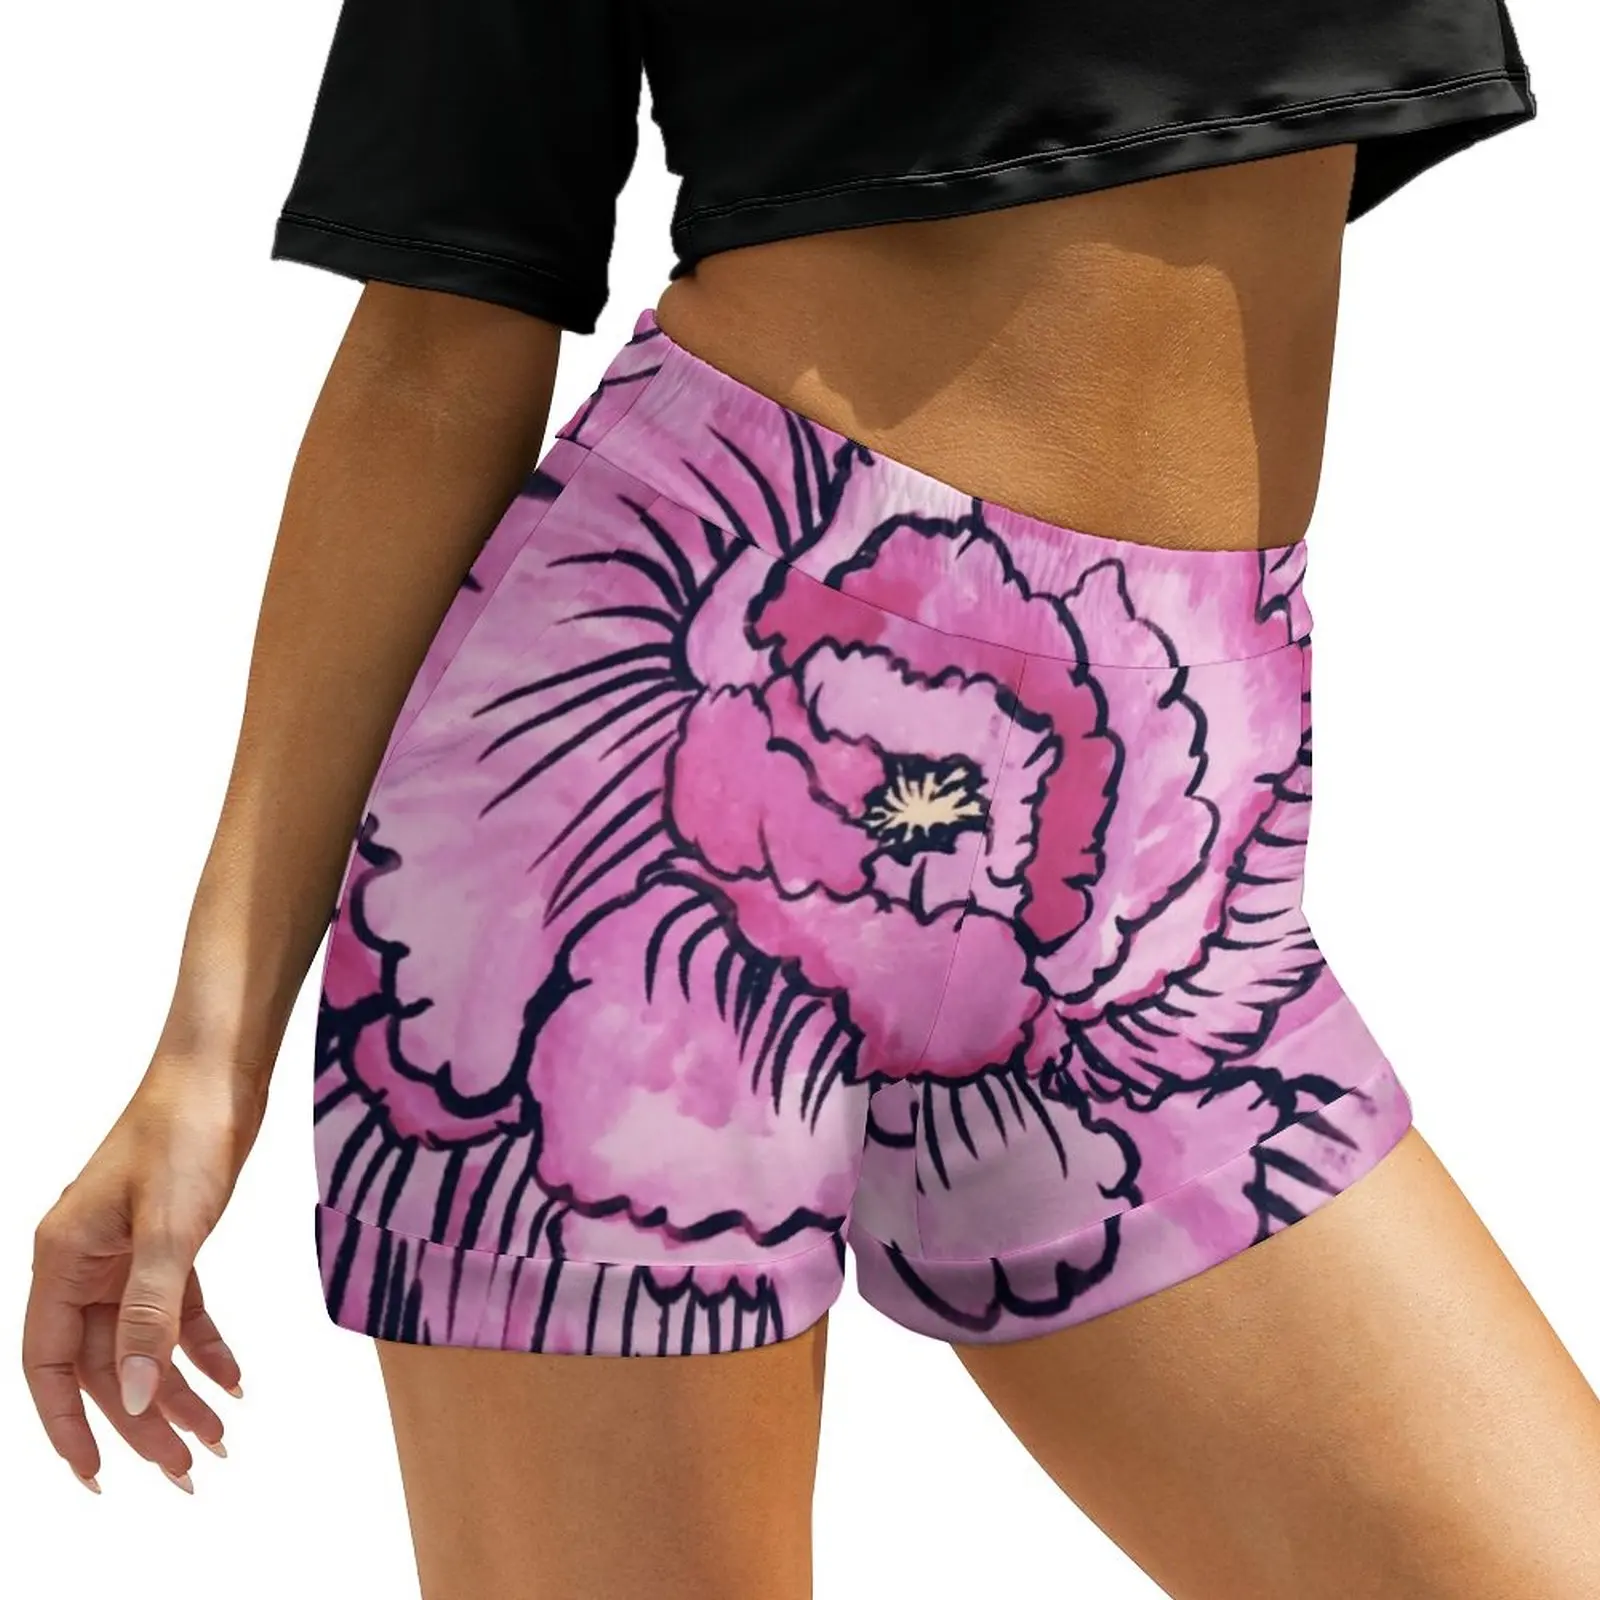 Big Pink Flower Shorts Female Abstract Floral Print Street Style Print Shorts High Waisted Oversize Short Pants Elegant Bottoms